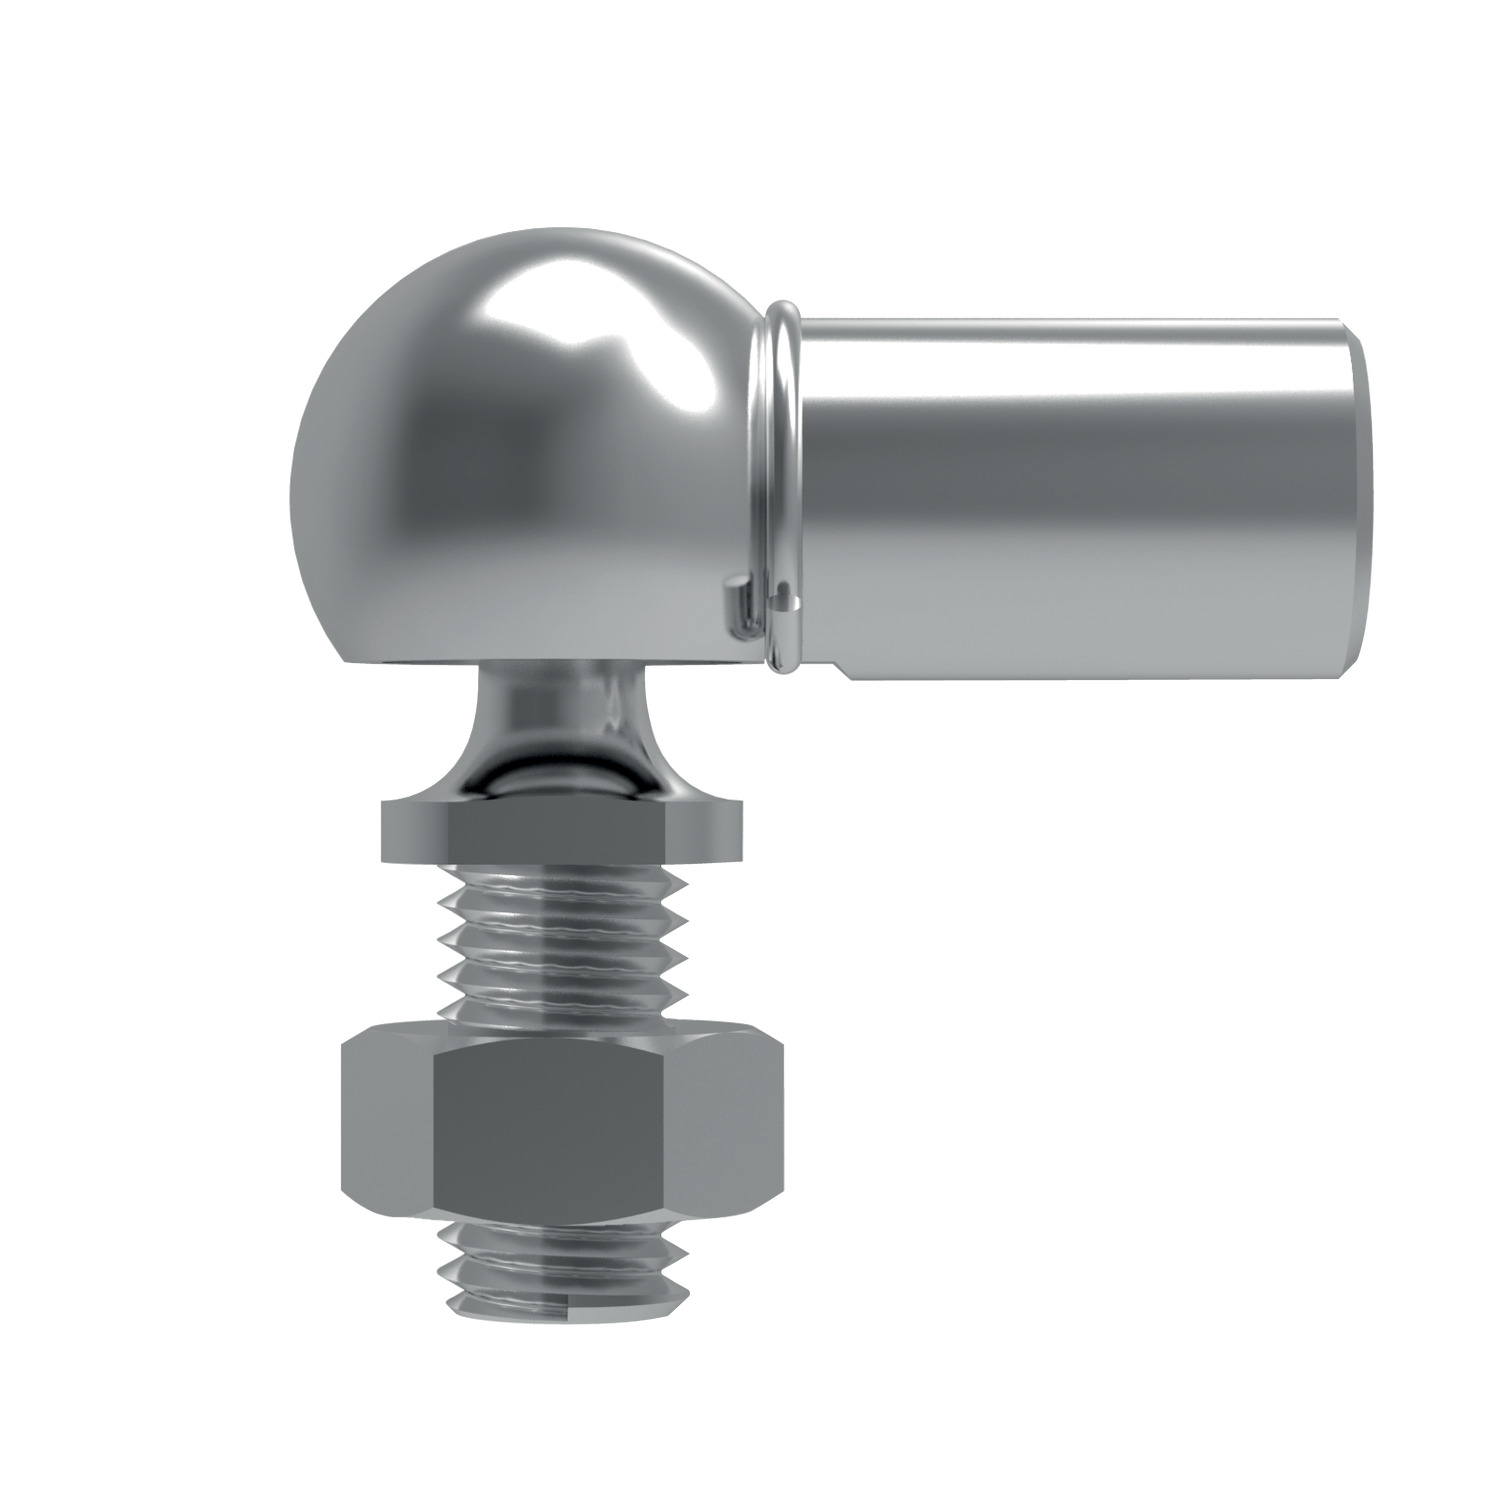 Product 65506, Stainless Ball and Socket Joints left hand thread / 